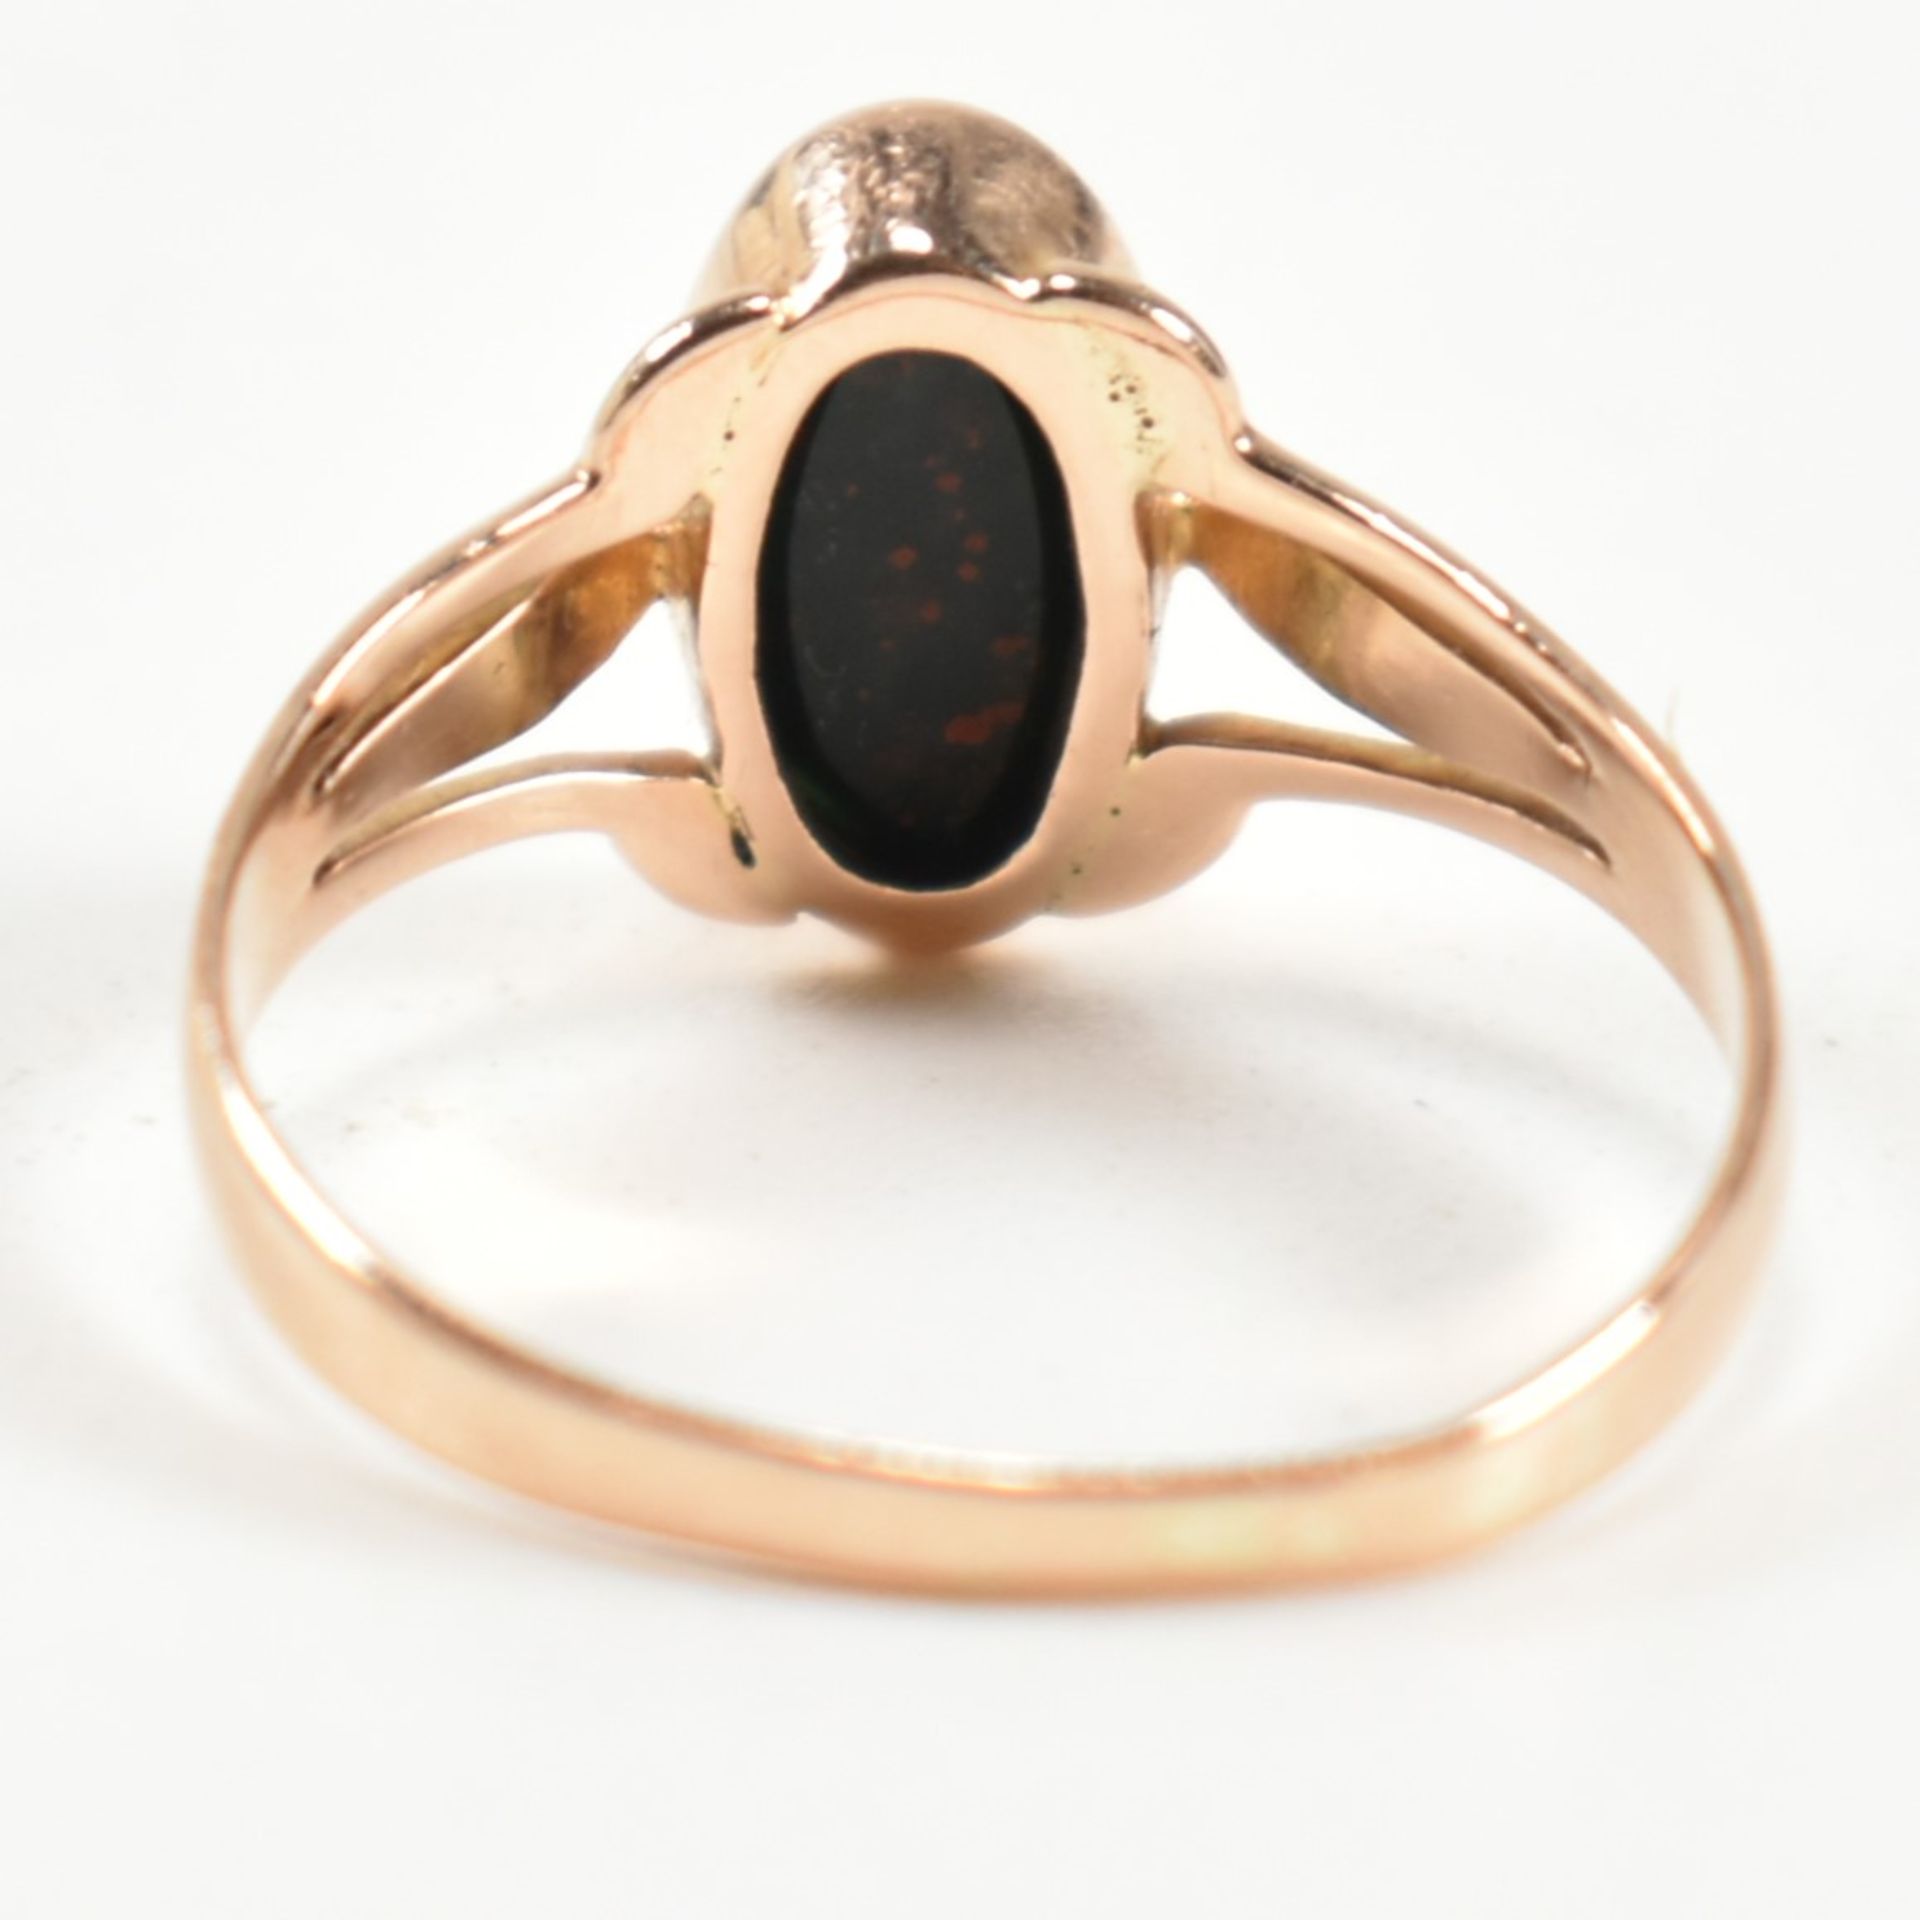 GOLD & BLOODSTONE RING - Image 2 of 9